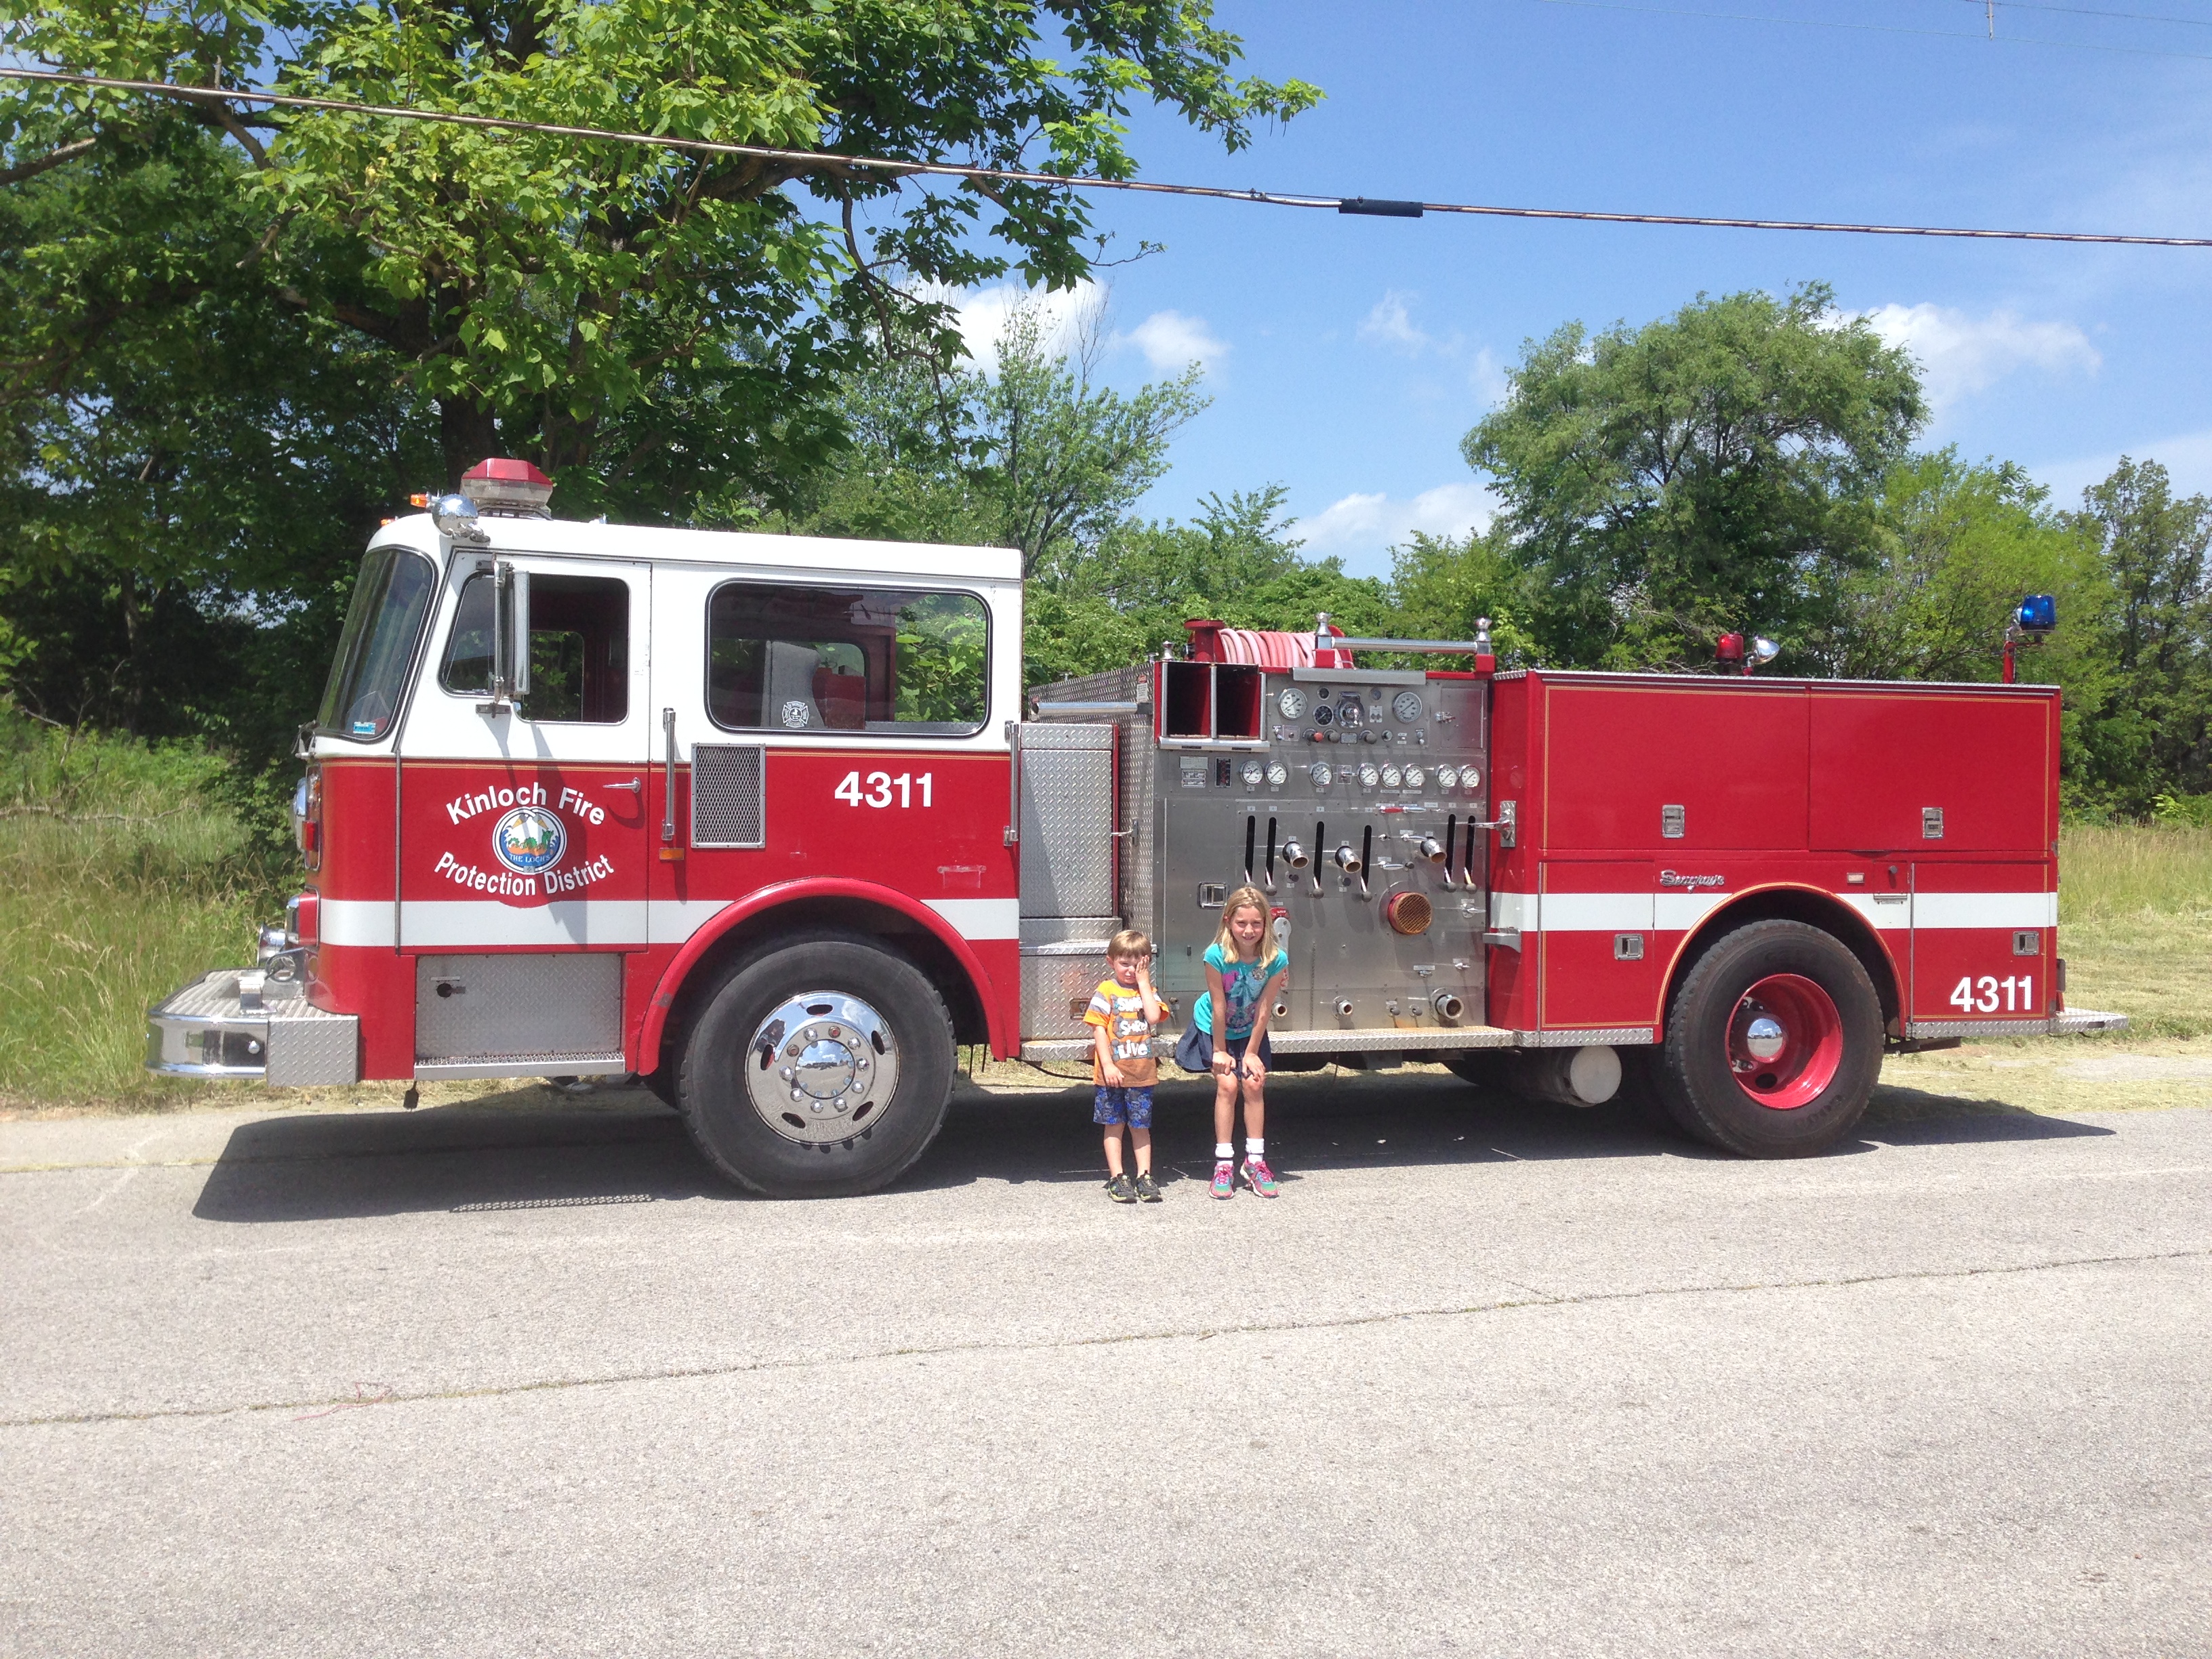 You can buy a fire truck on Craigslist!